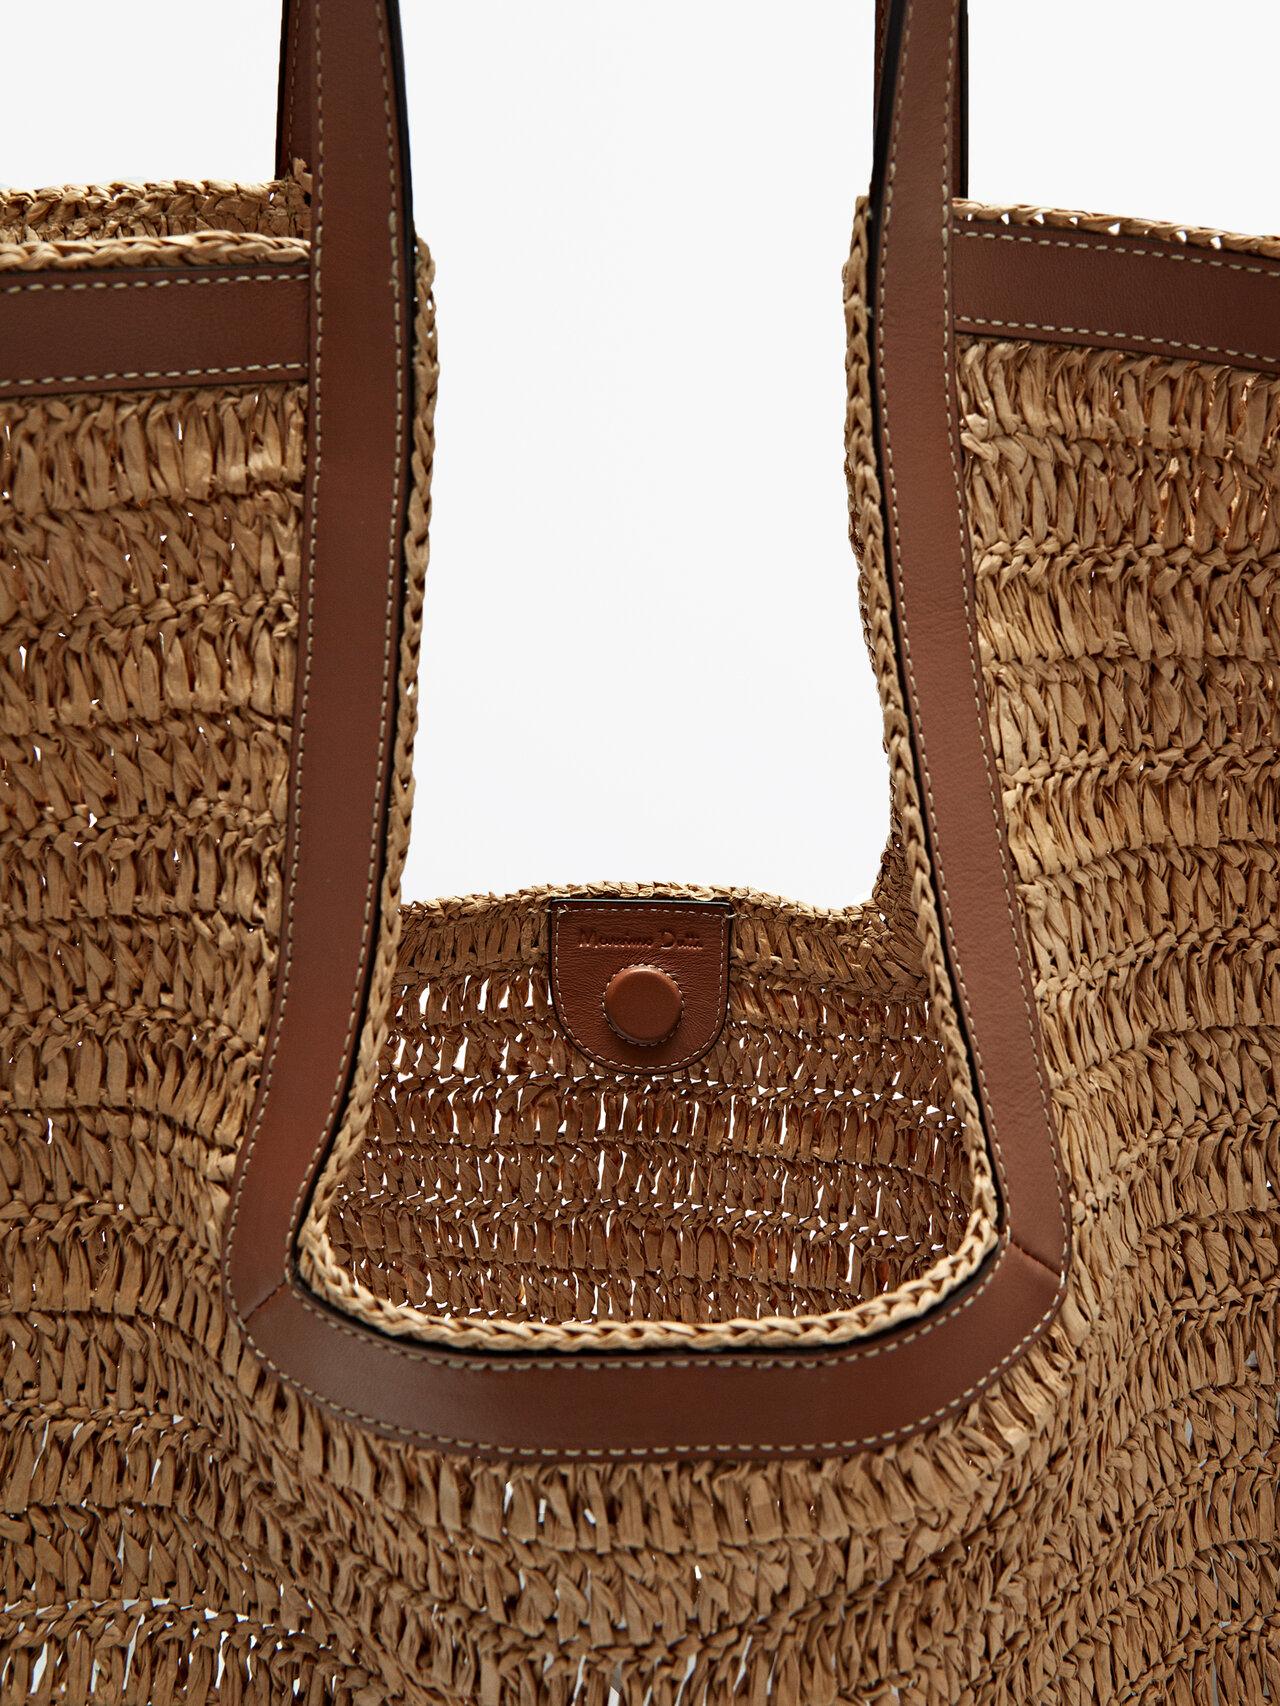 MASSIMO DUTTI Raffia Maxi Tote Bag With Leather Handles in Natural | Lyst